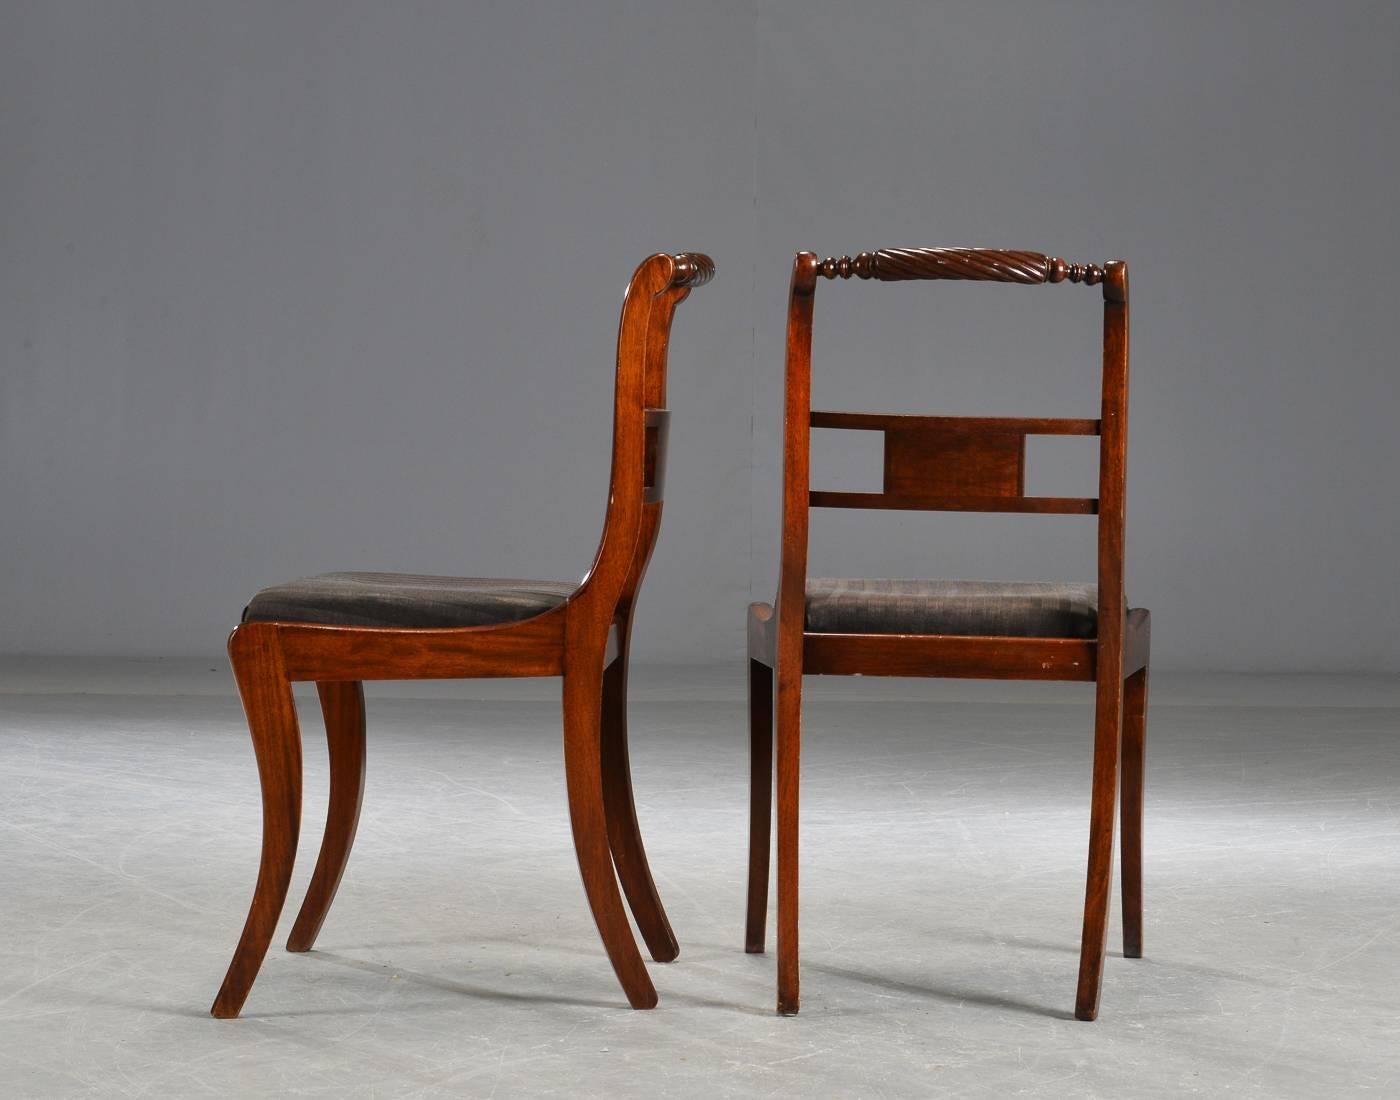 Solid mahogany, Regency style dining chairs. The seat of striped black fabric. 
Dimensions: Height 85 cm, wide 50 cm, Sh 46 cm. 
Very good original condition.